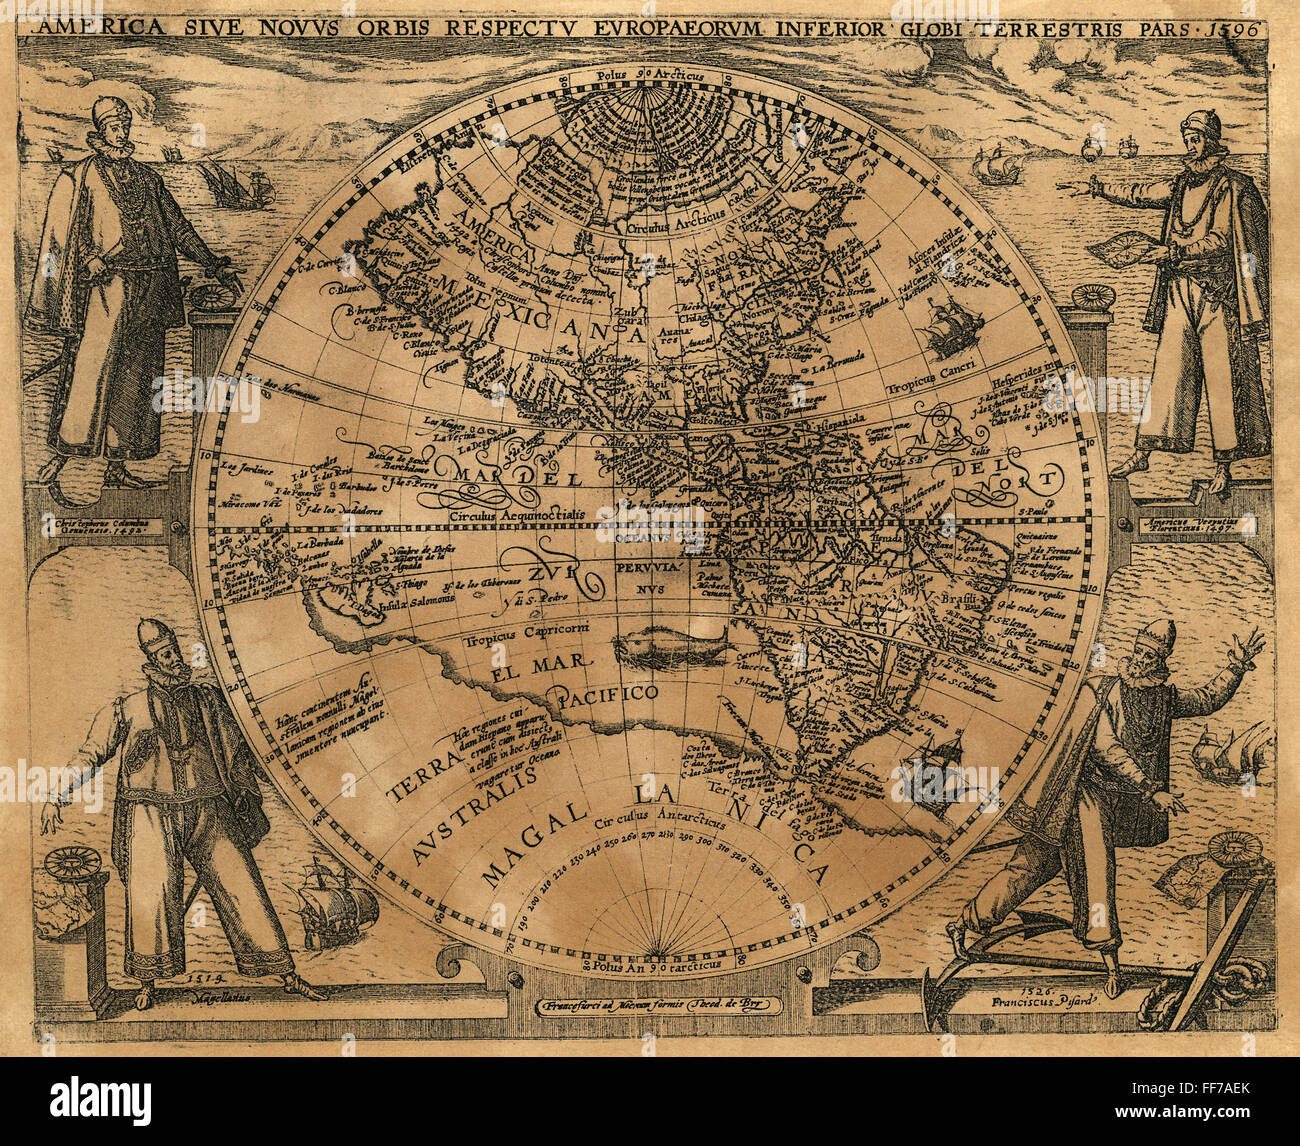 WESTERN HEMISPHERE, 1596. /nTheodore de Bry's map of the western hemisphere, 1596, surrounded by the explorers (clockwise from top left) Columbus, Vespucci, Pizarro, and Magellan. Stock Photo